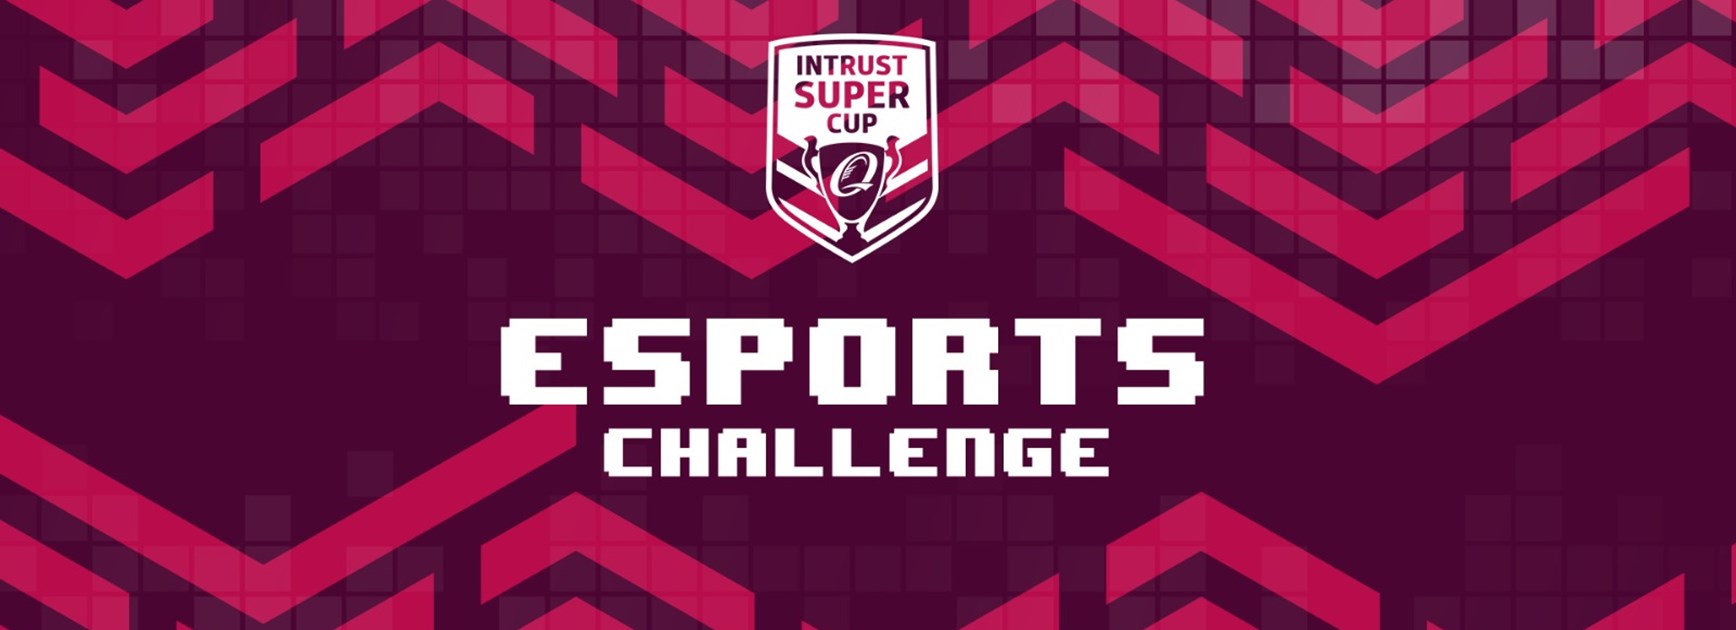 Sauiluma and Purcell to battle for E-sports Challenge supremacy